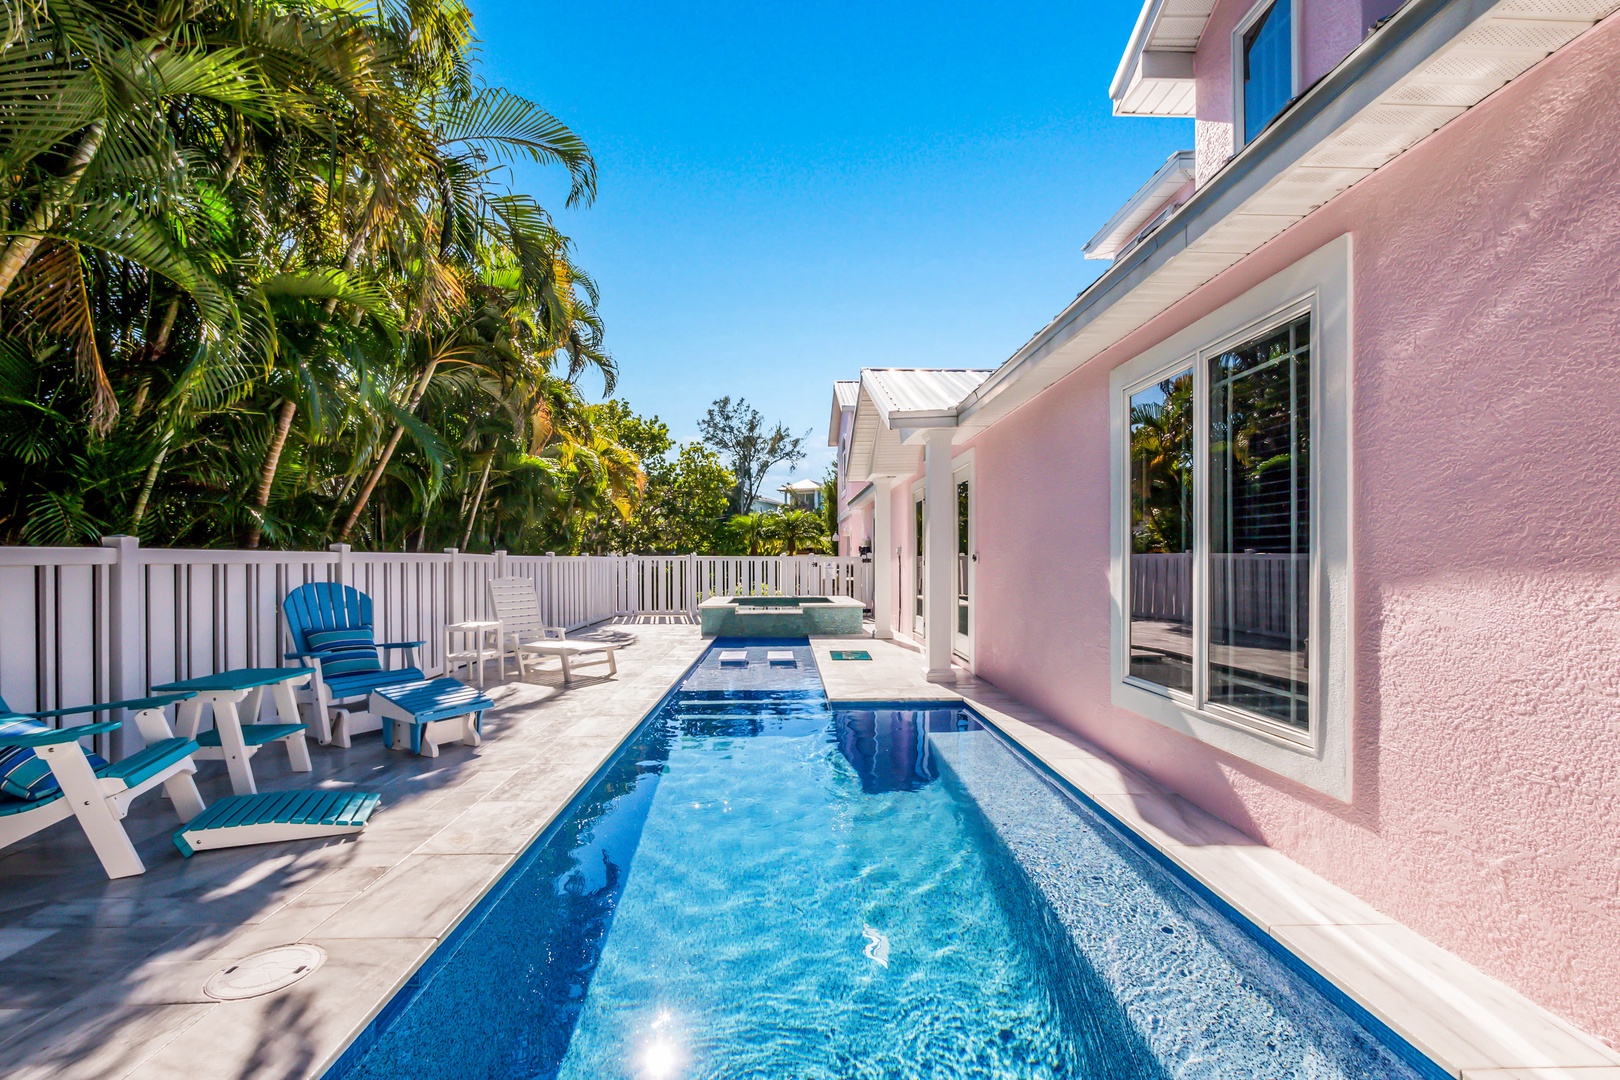 Little Pink Houses-Anna Maria Island Accommodations